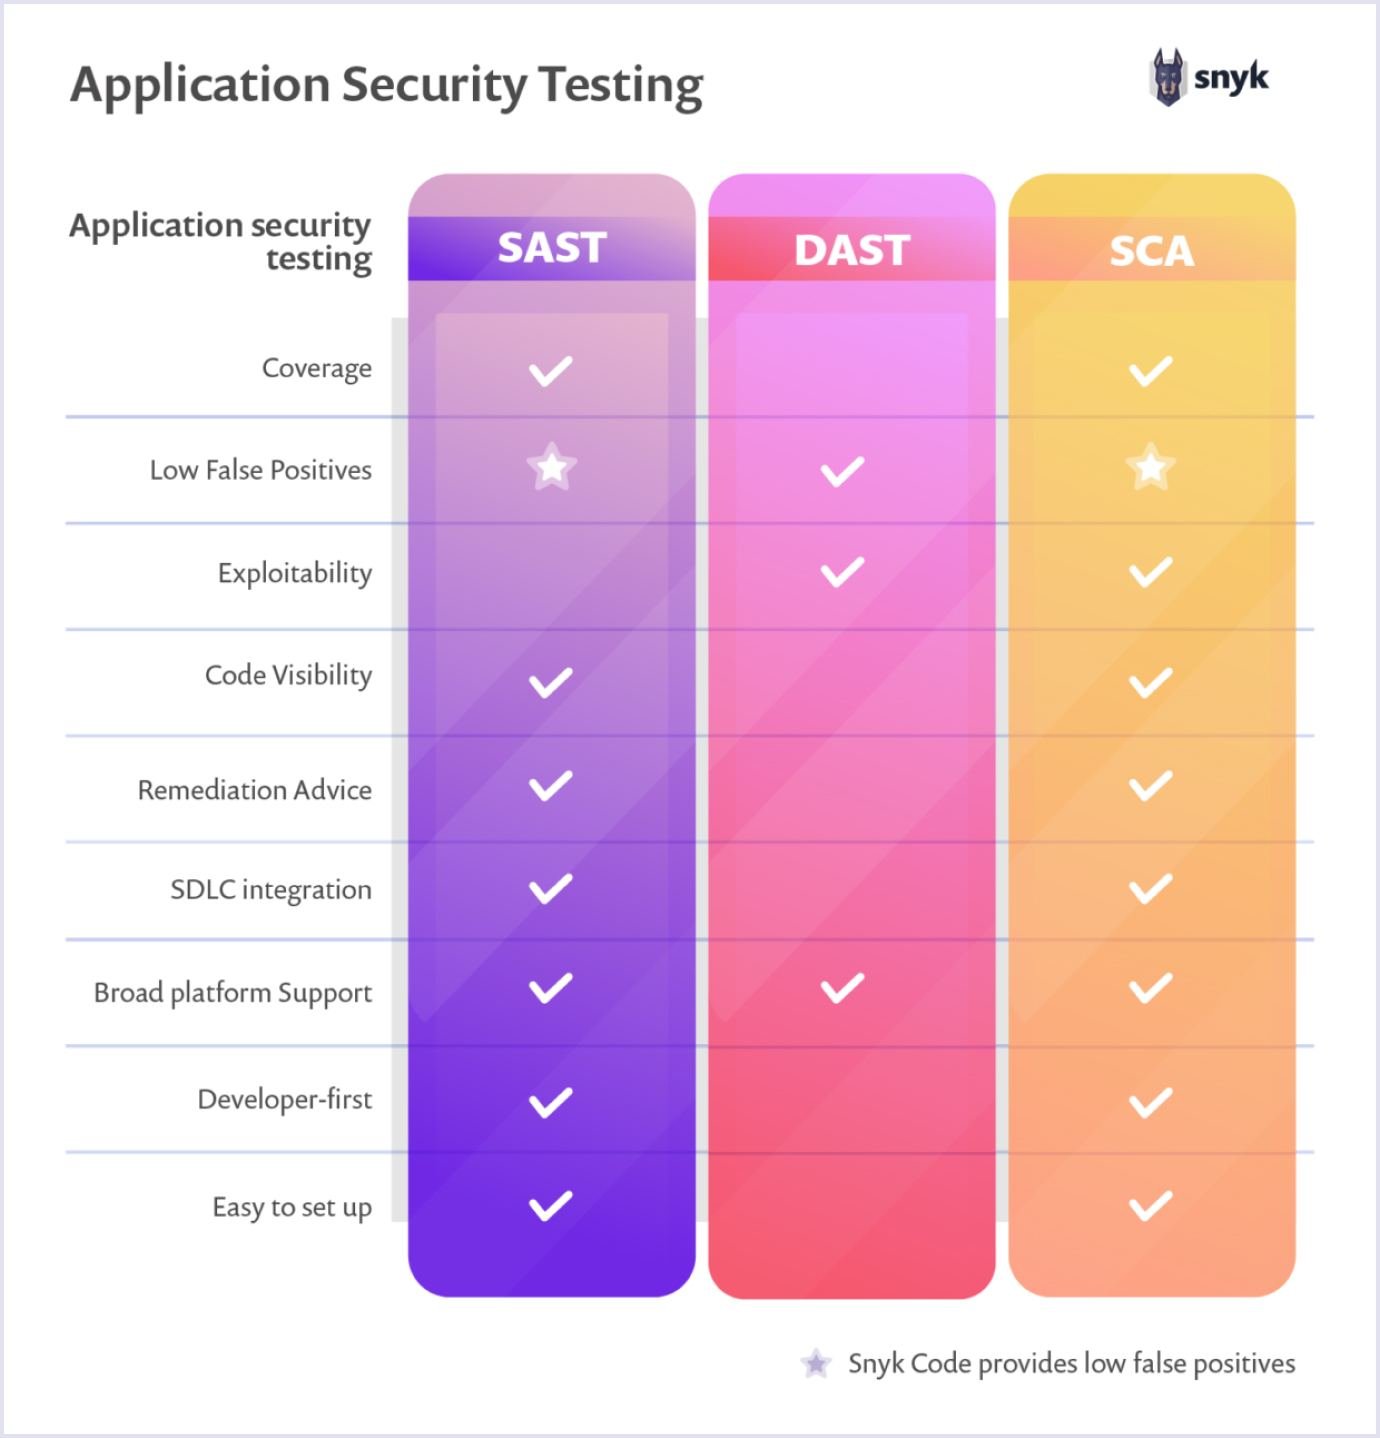 Types of application security testing